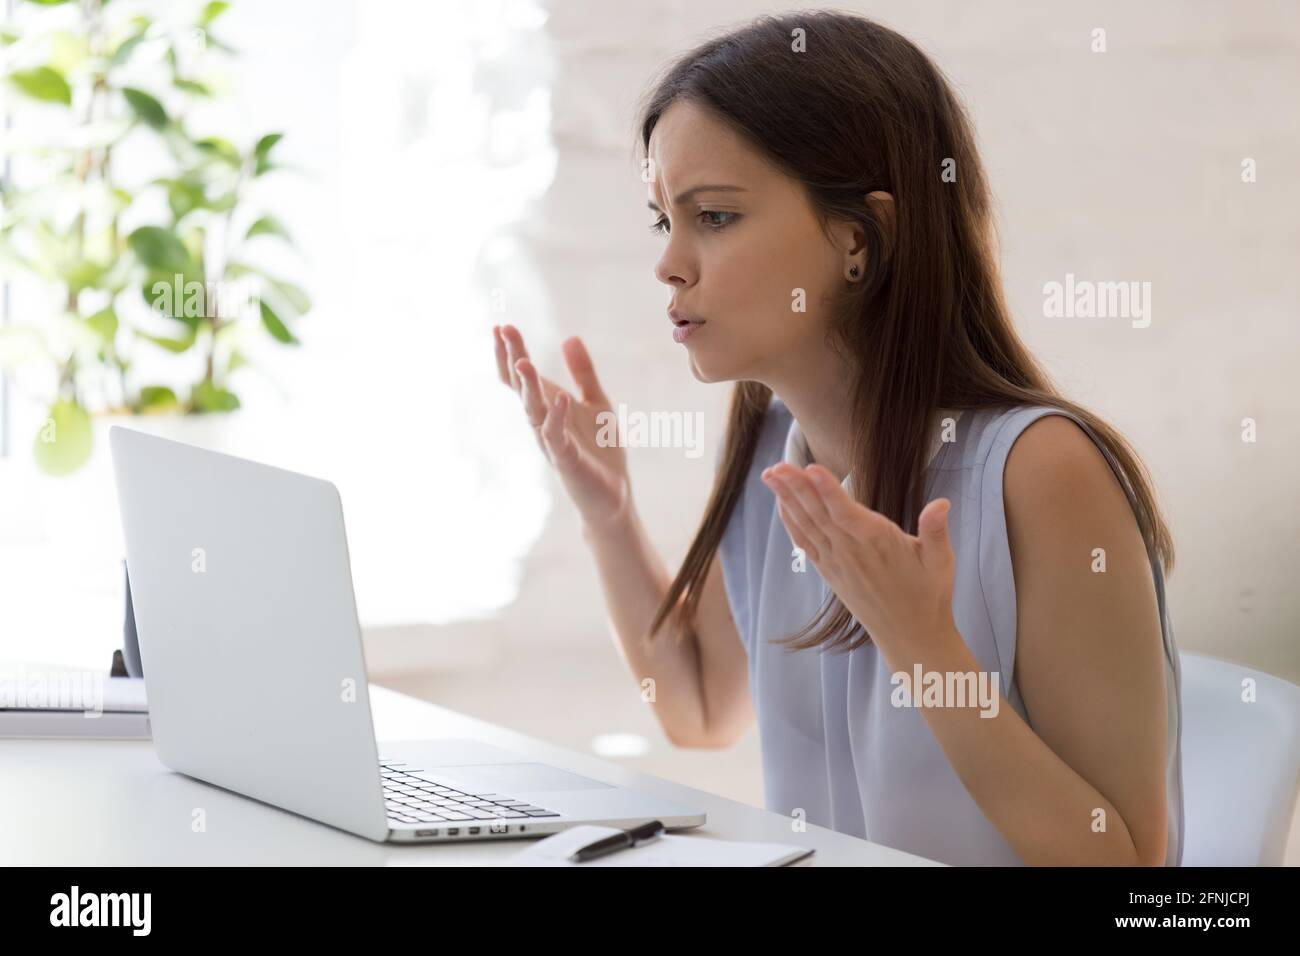 Unhappy millennial woman frustrated with computer problems Stock Photo